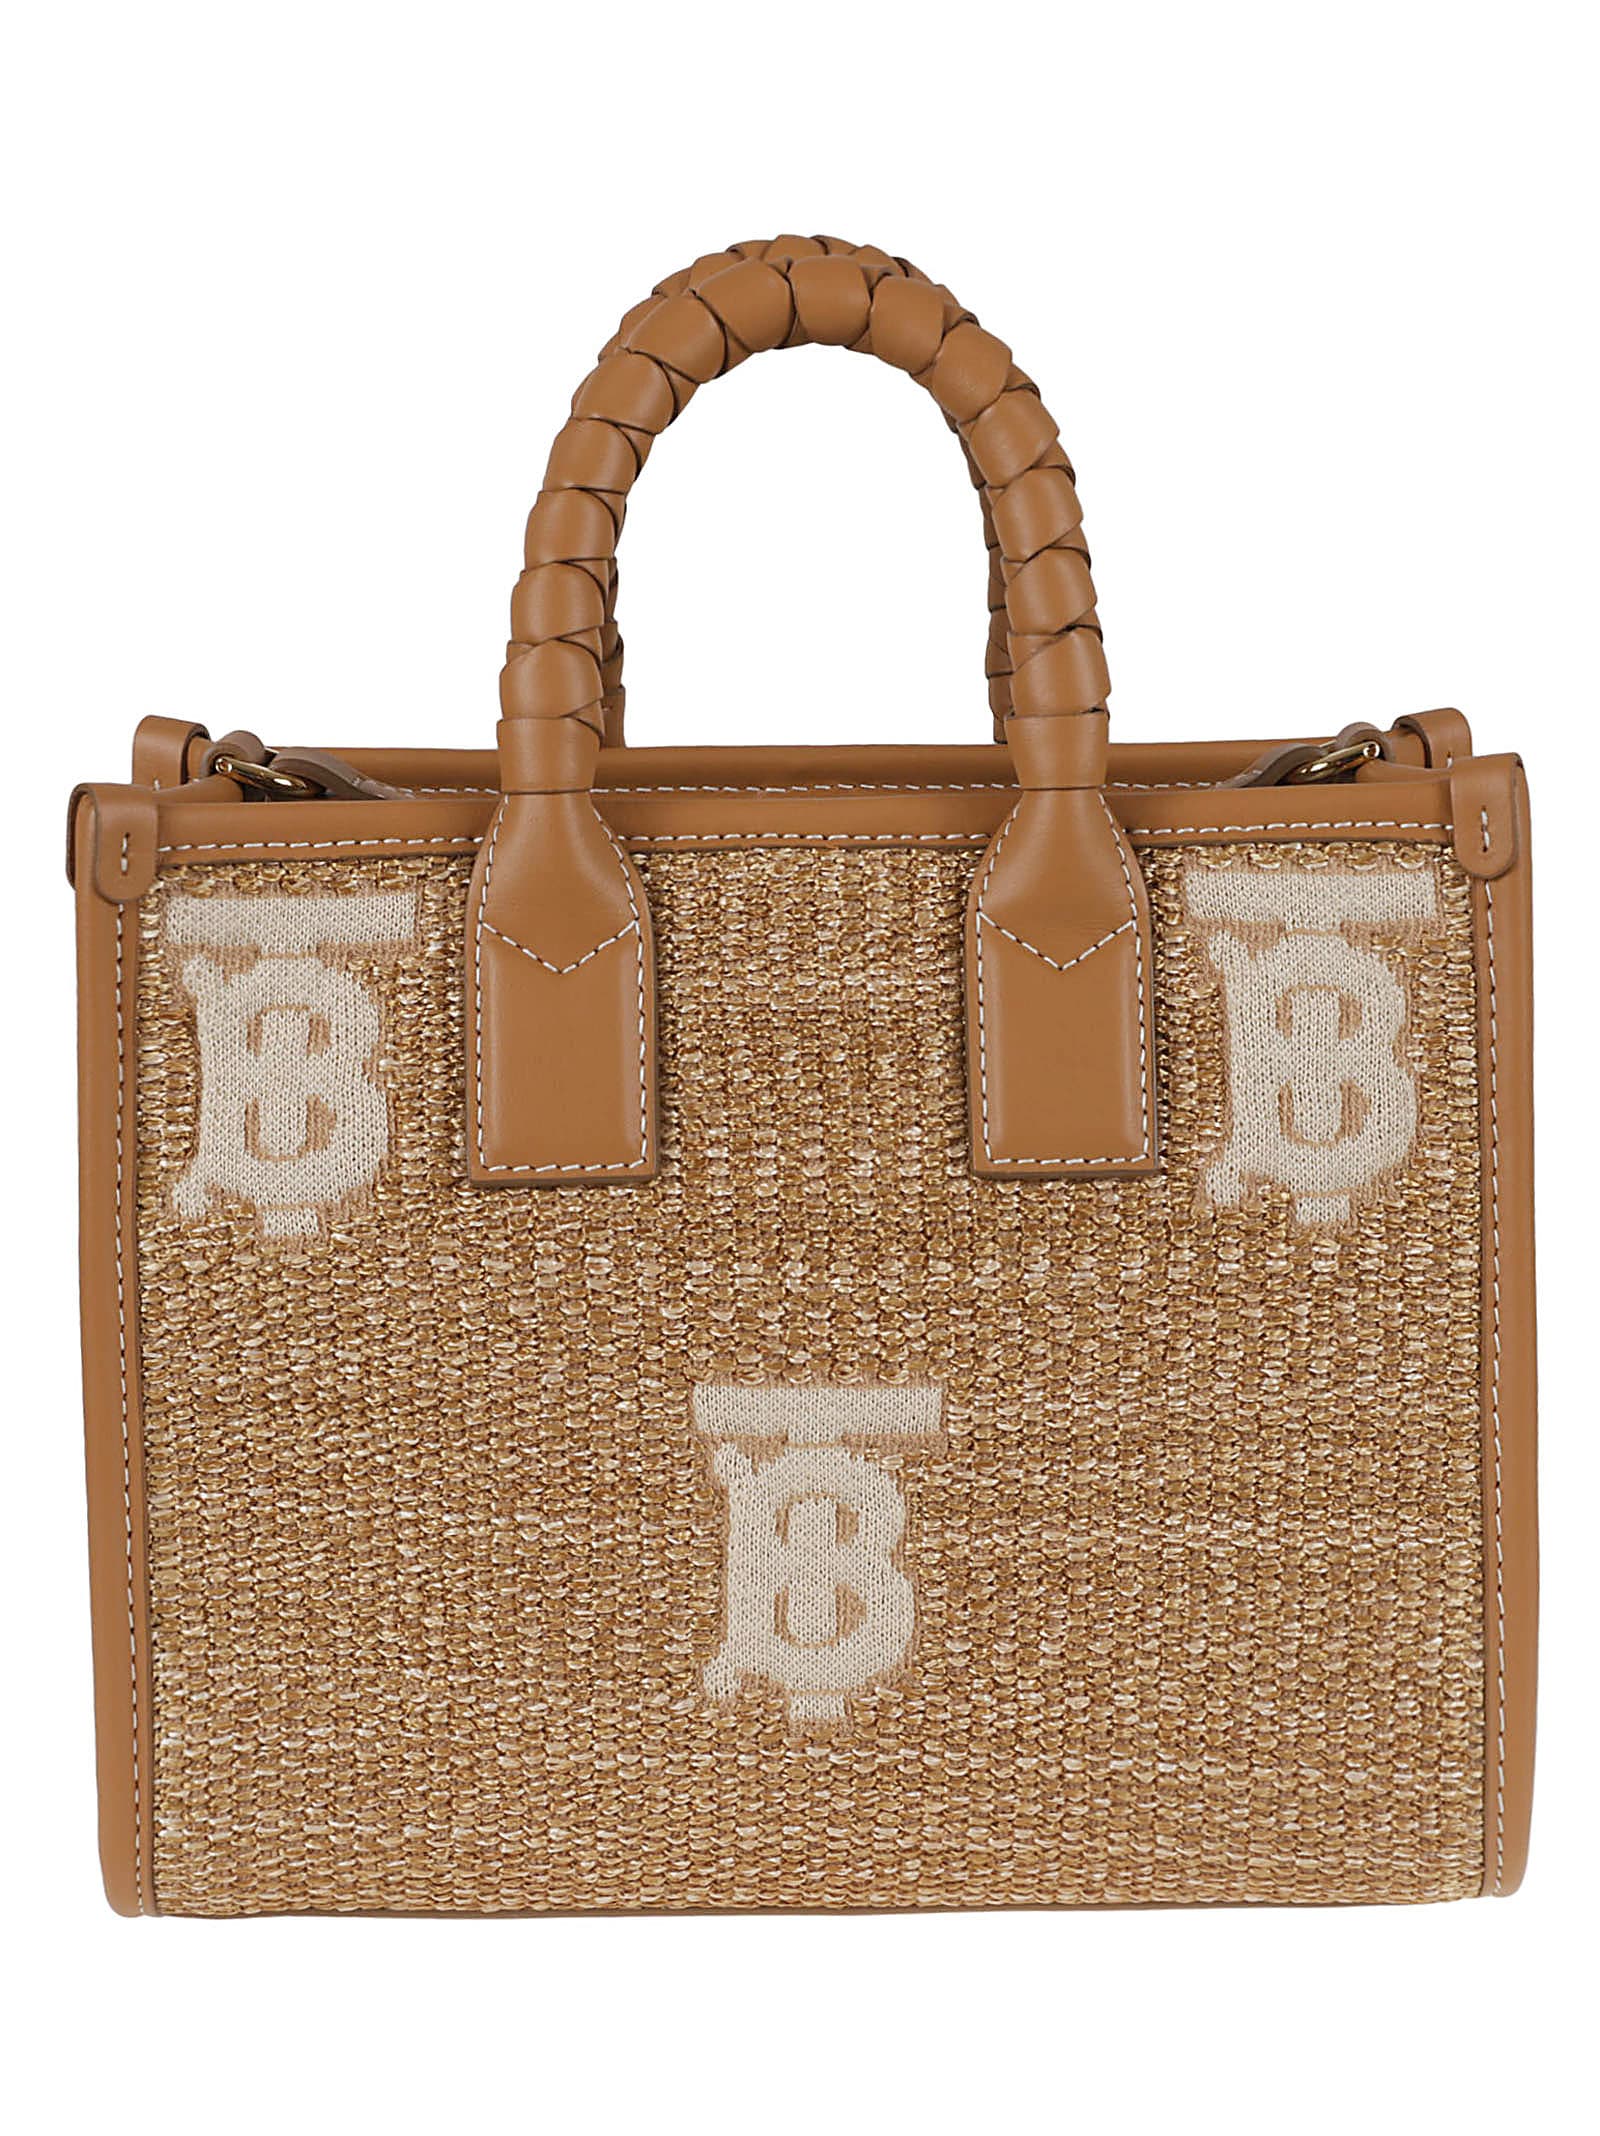 BURBERRY LOGO WEAVE TOTE